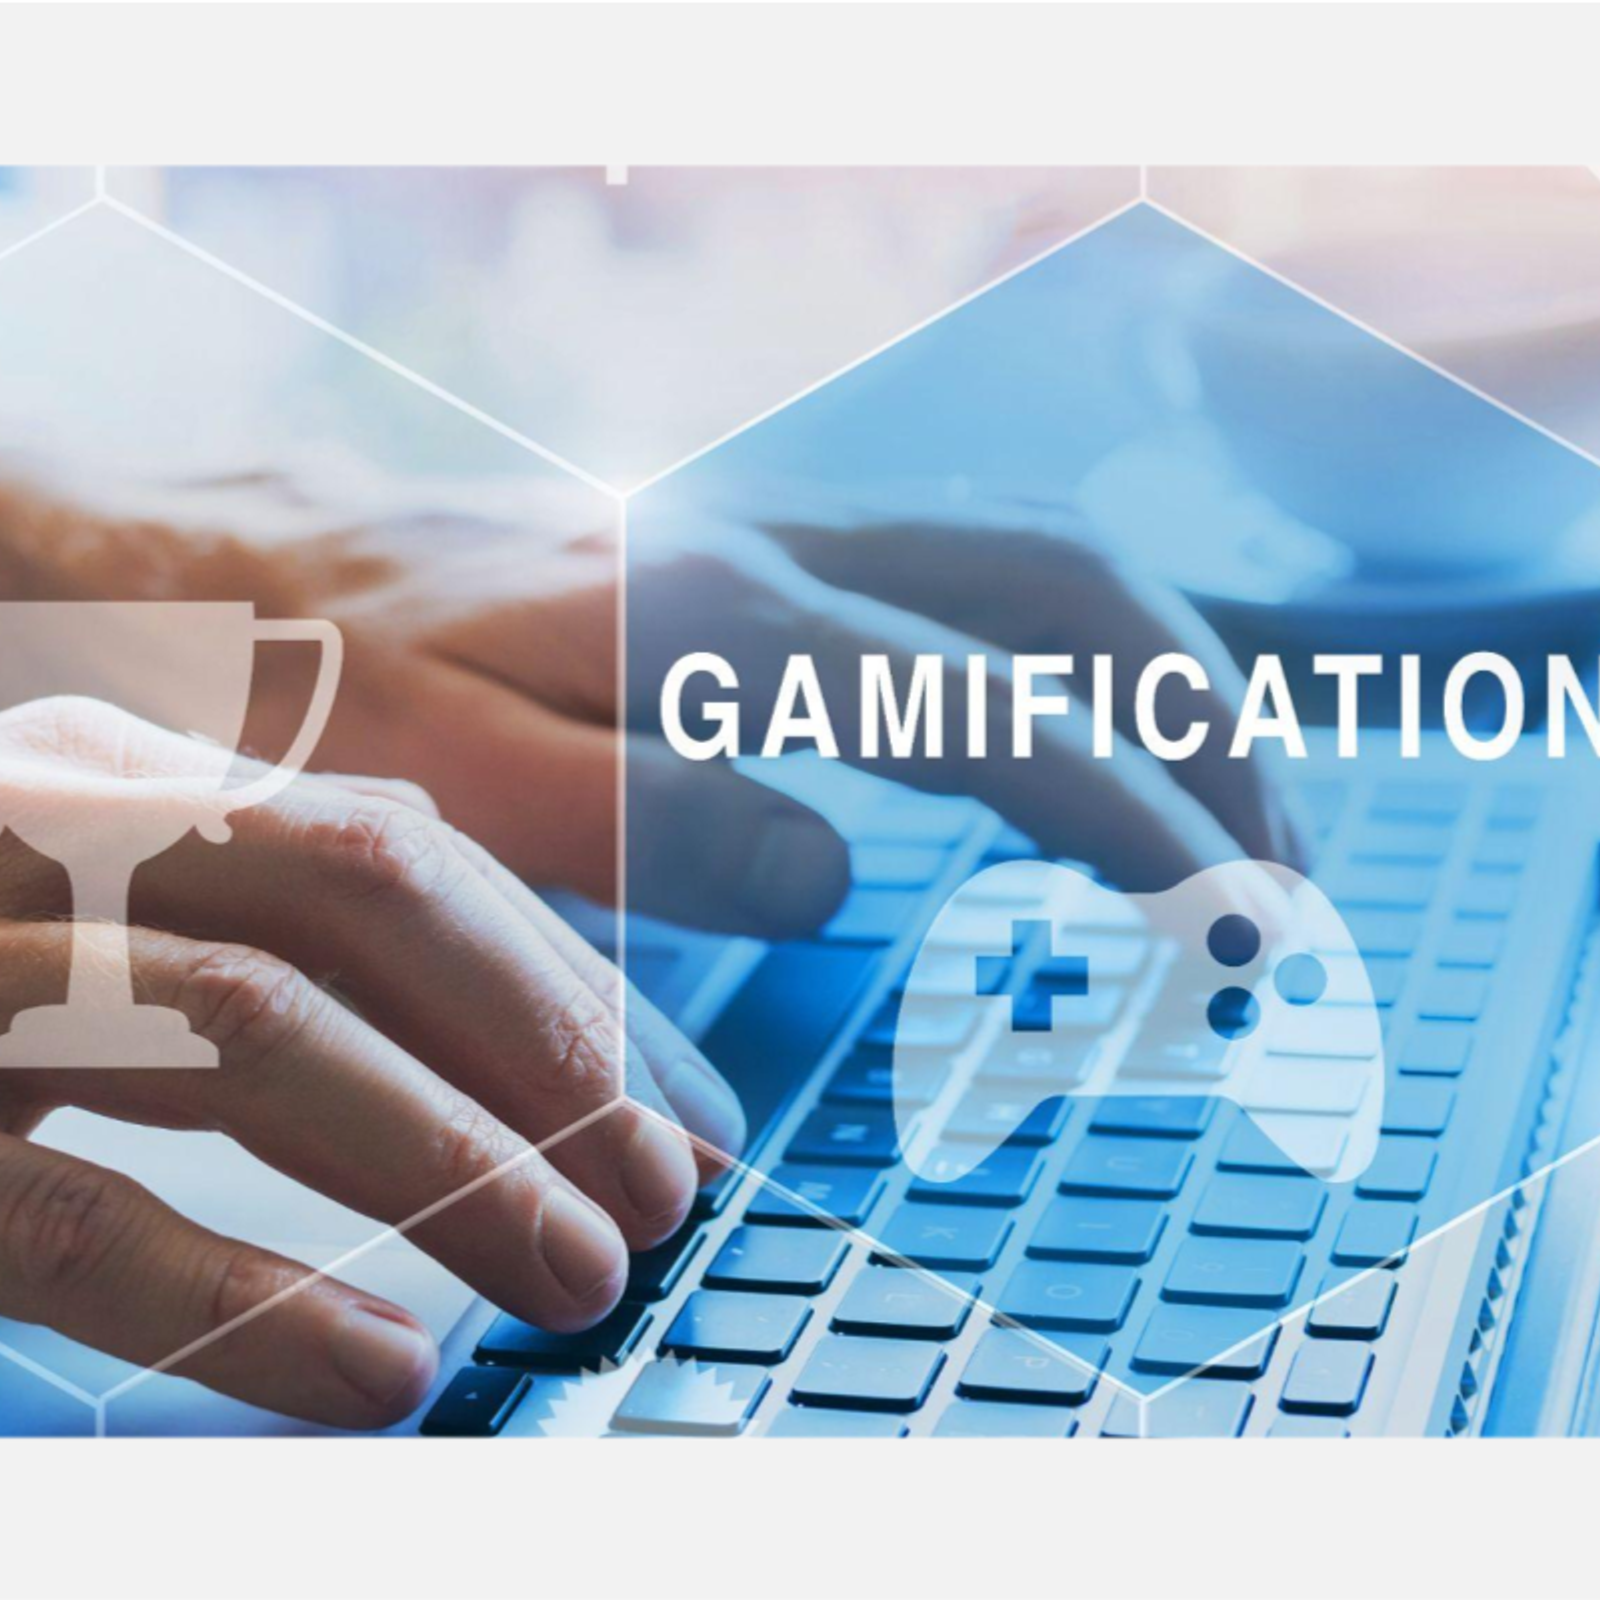 How gamification is changing the iGaming industry

